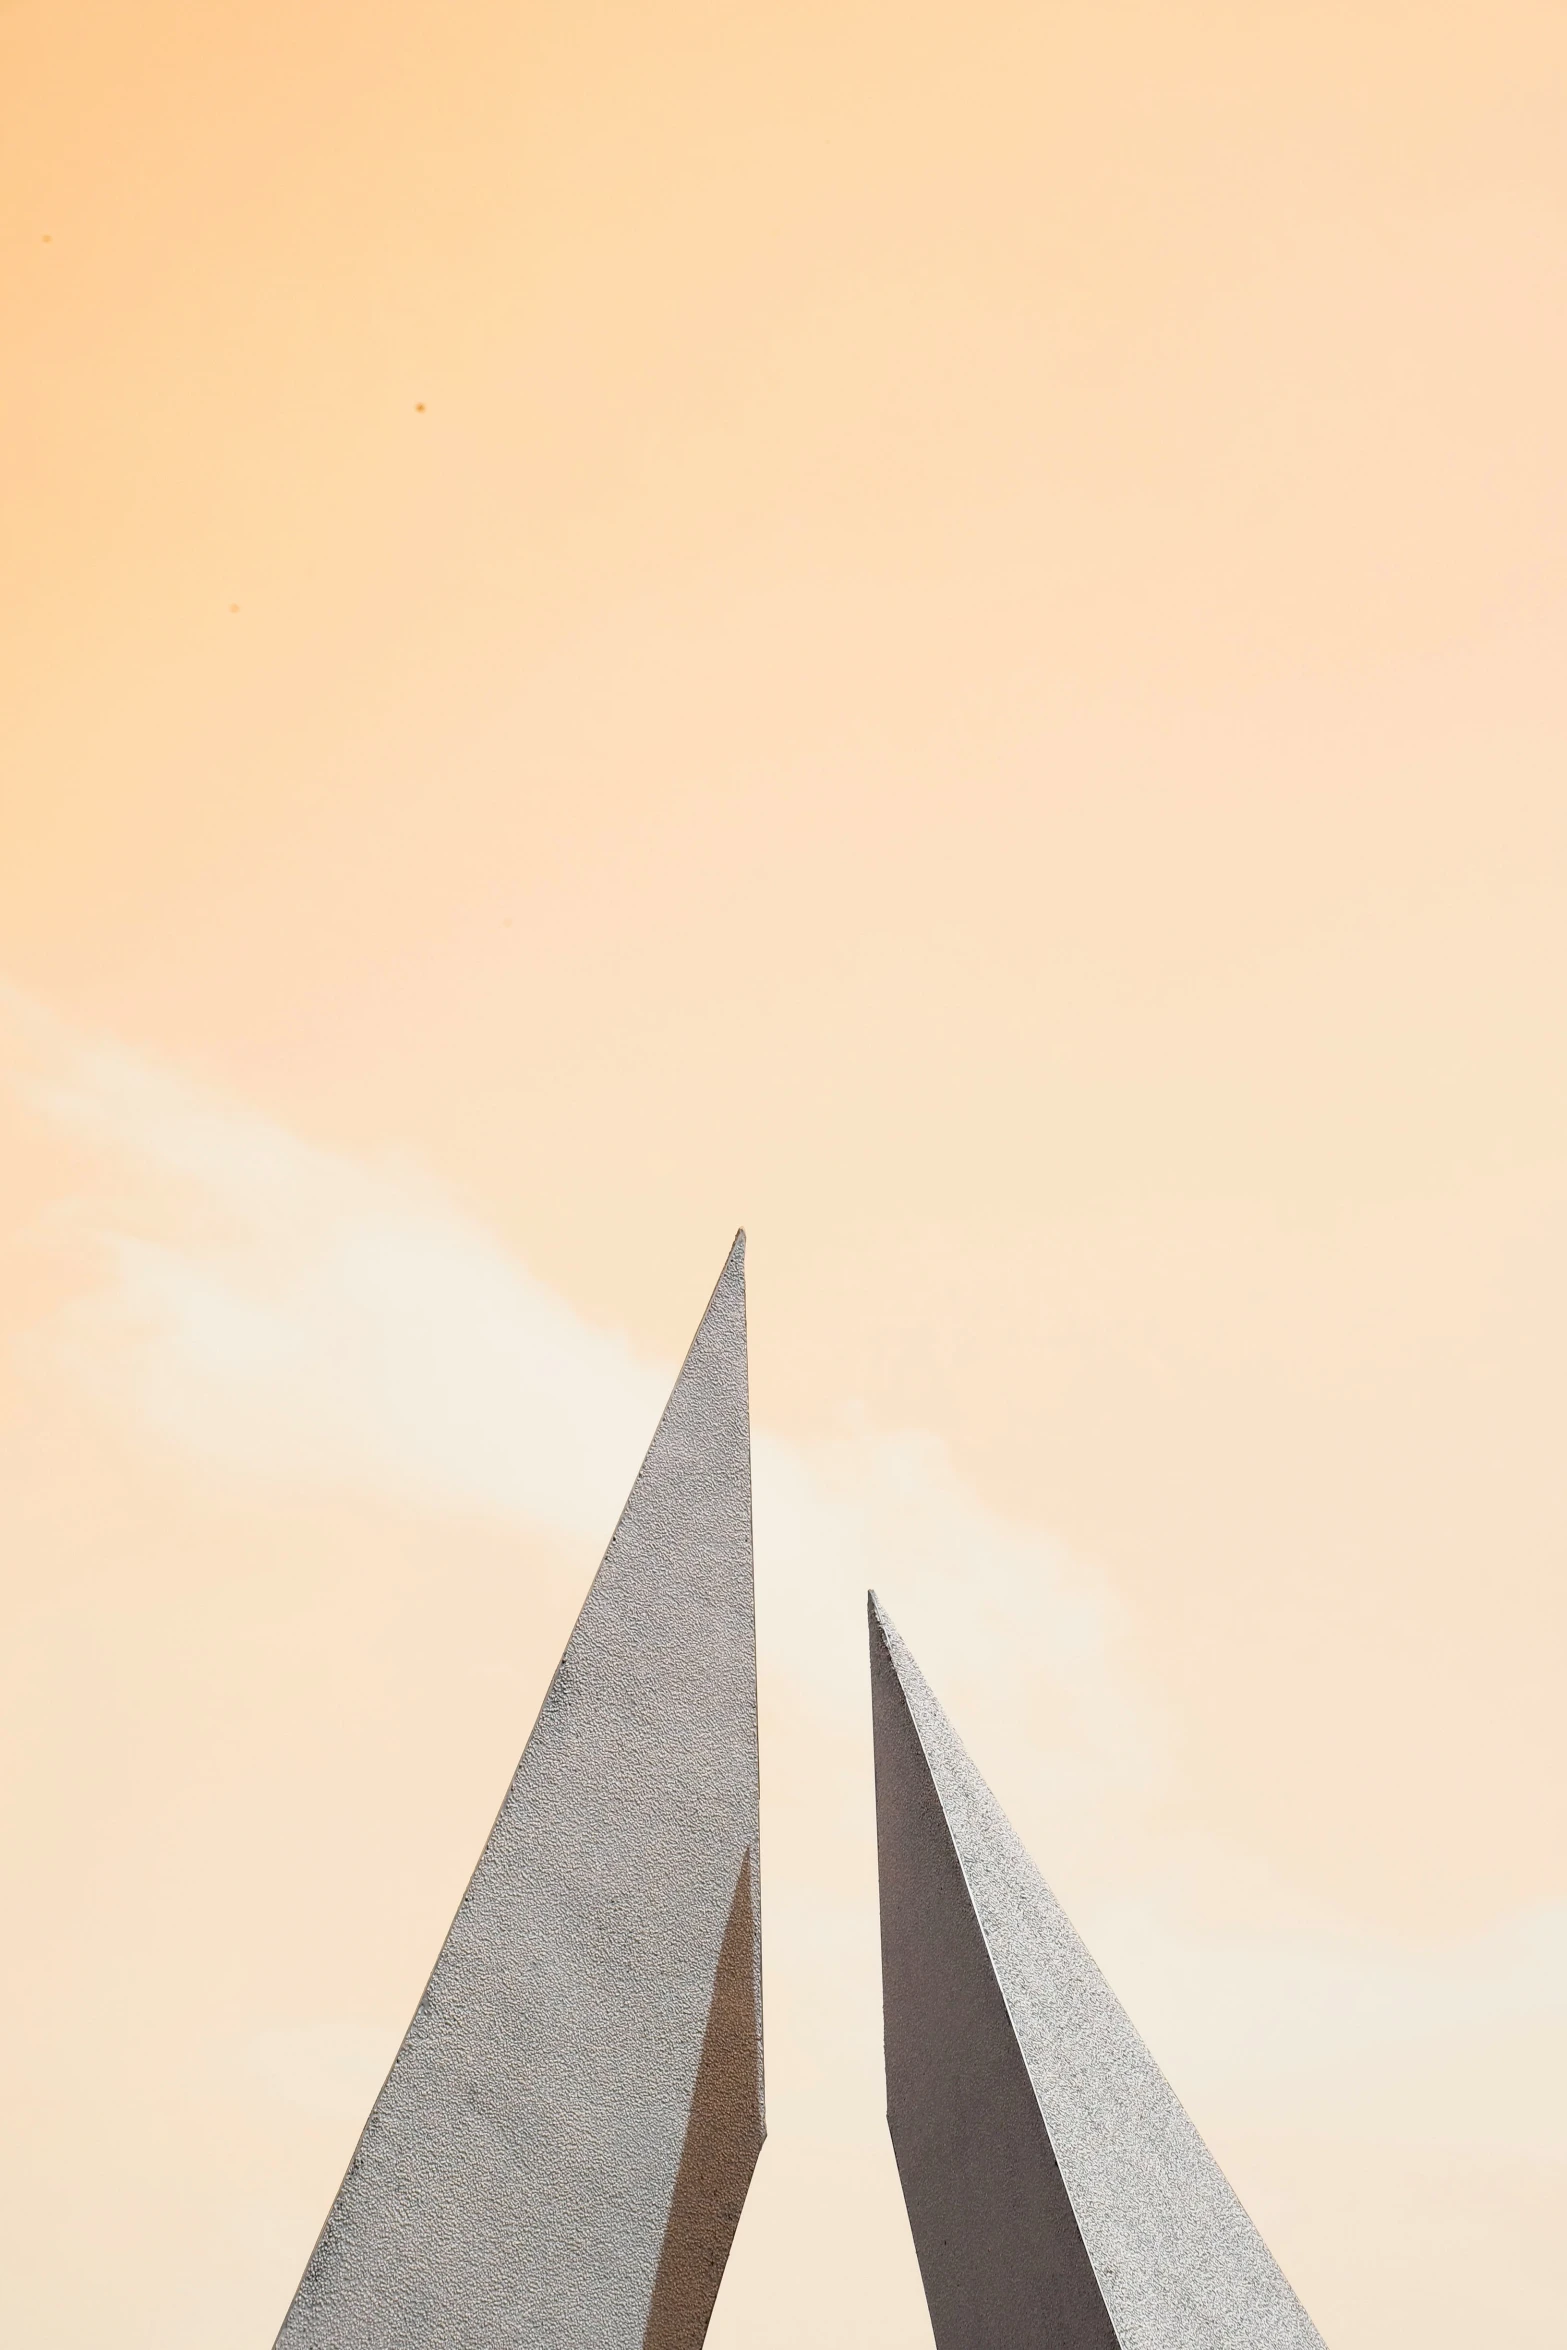 two sculptures with long slender stands against a bright sky